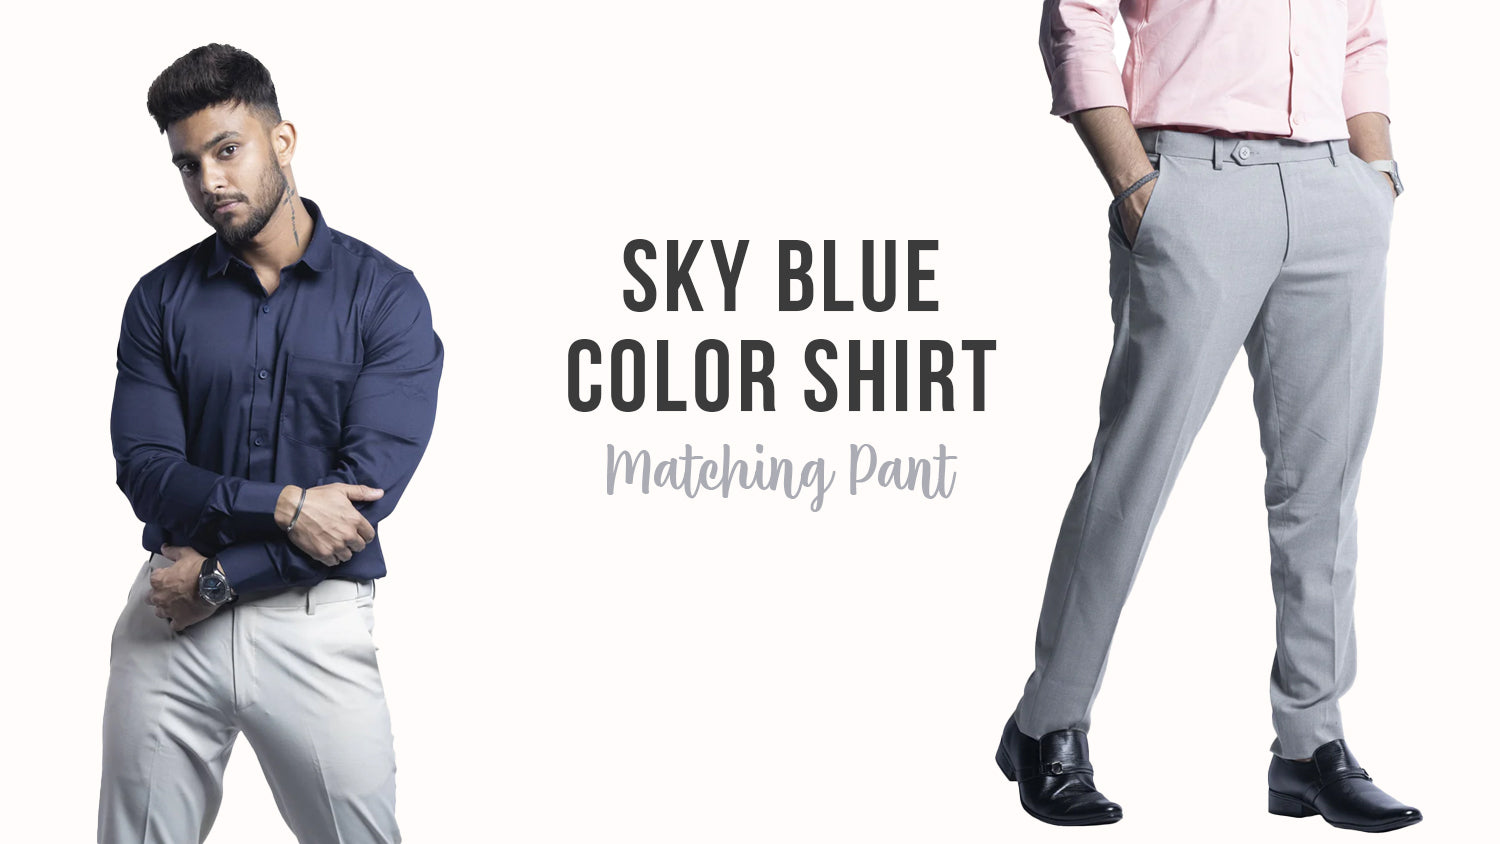 What colour pants will match every shirt? - Quora